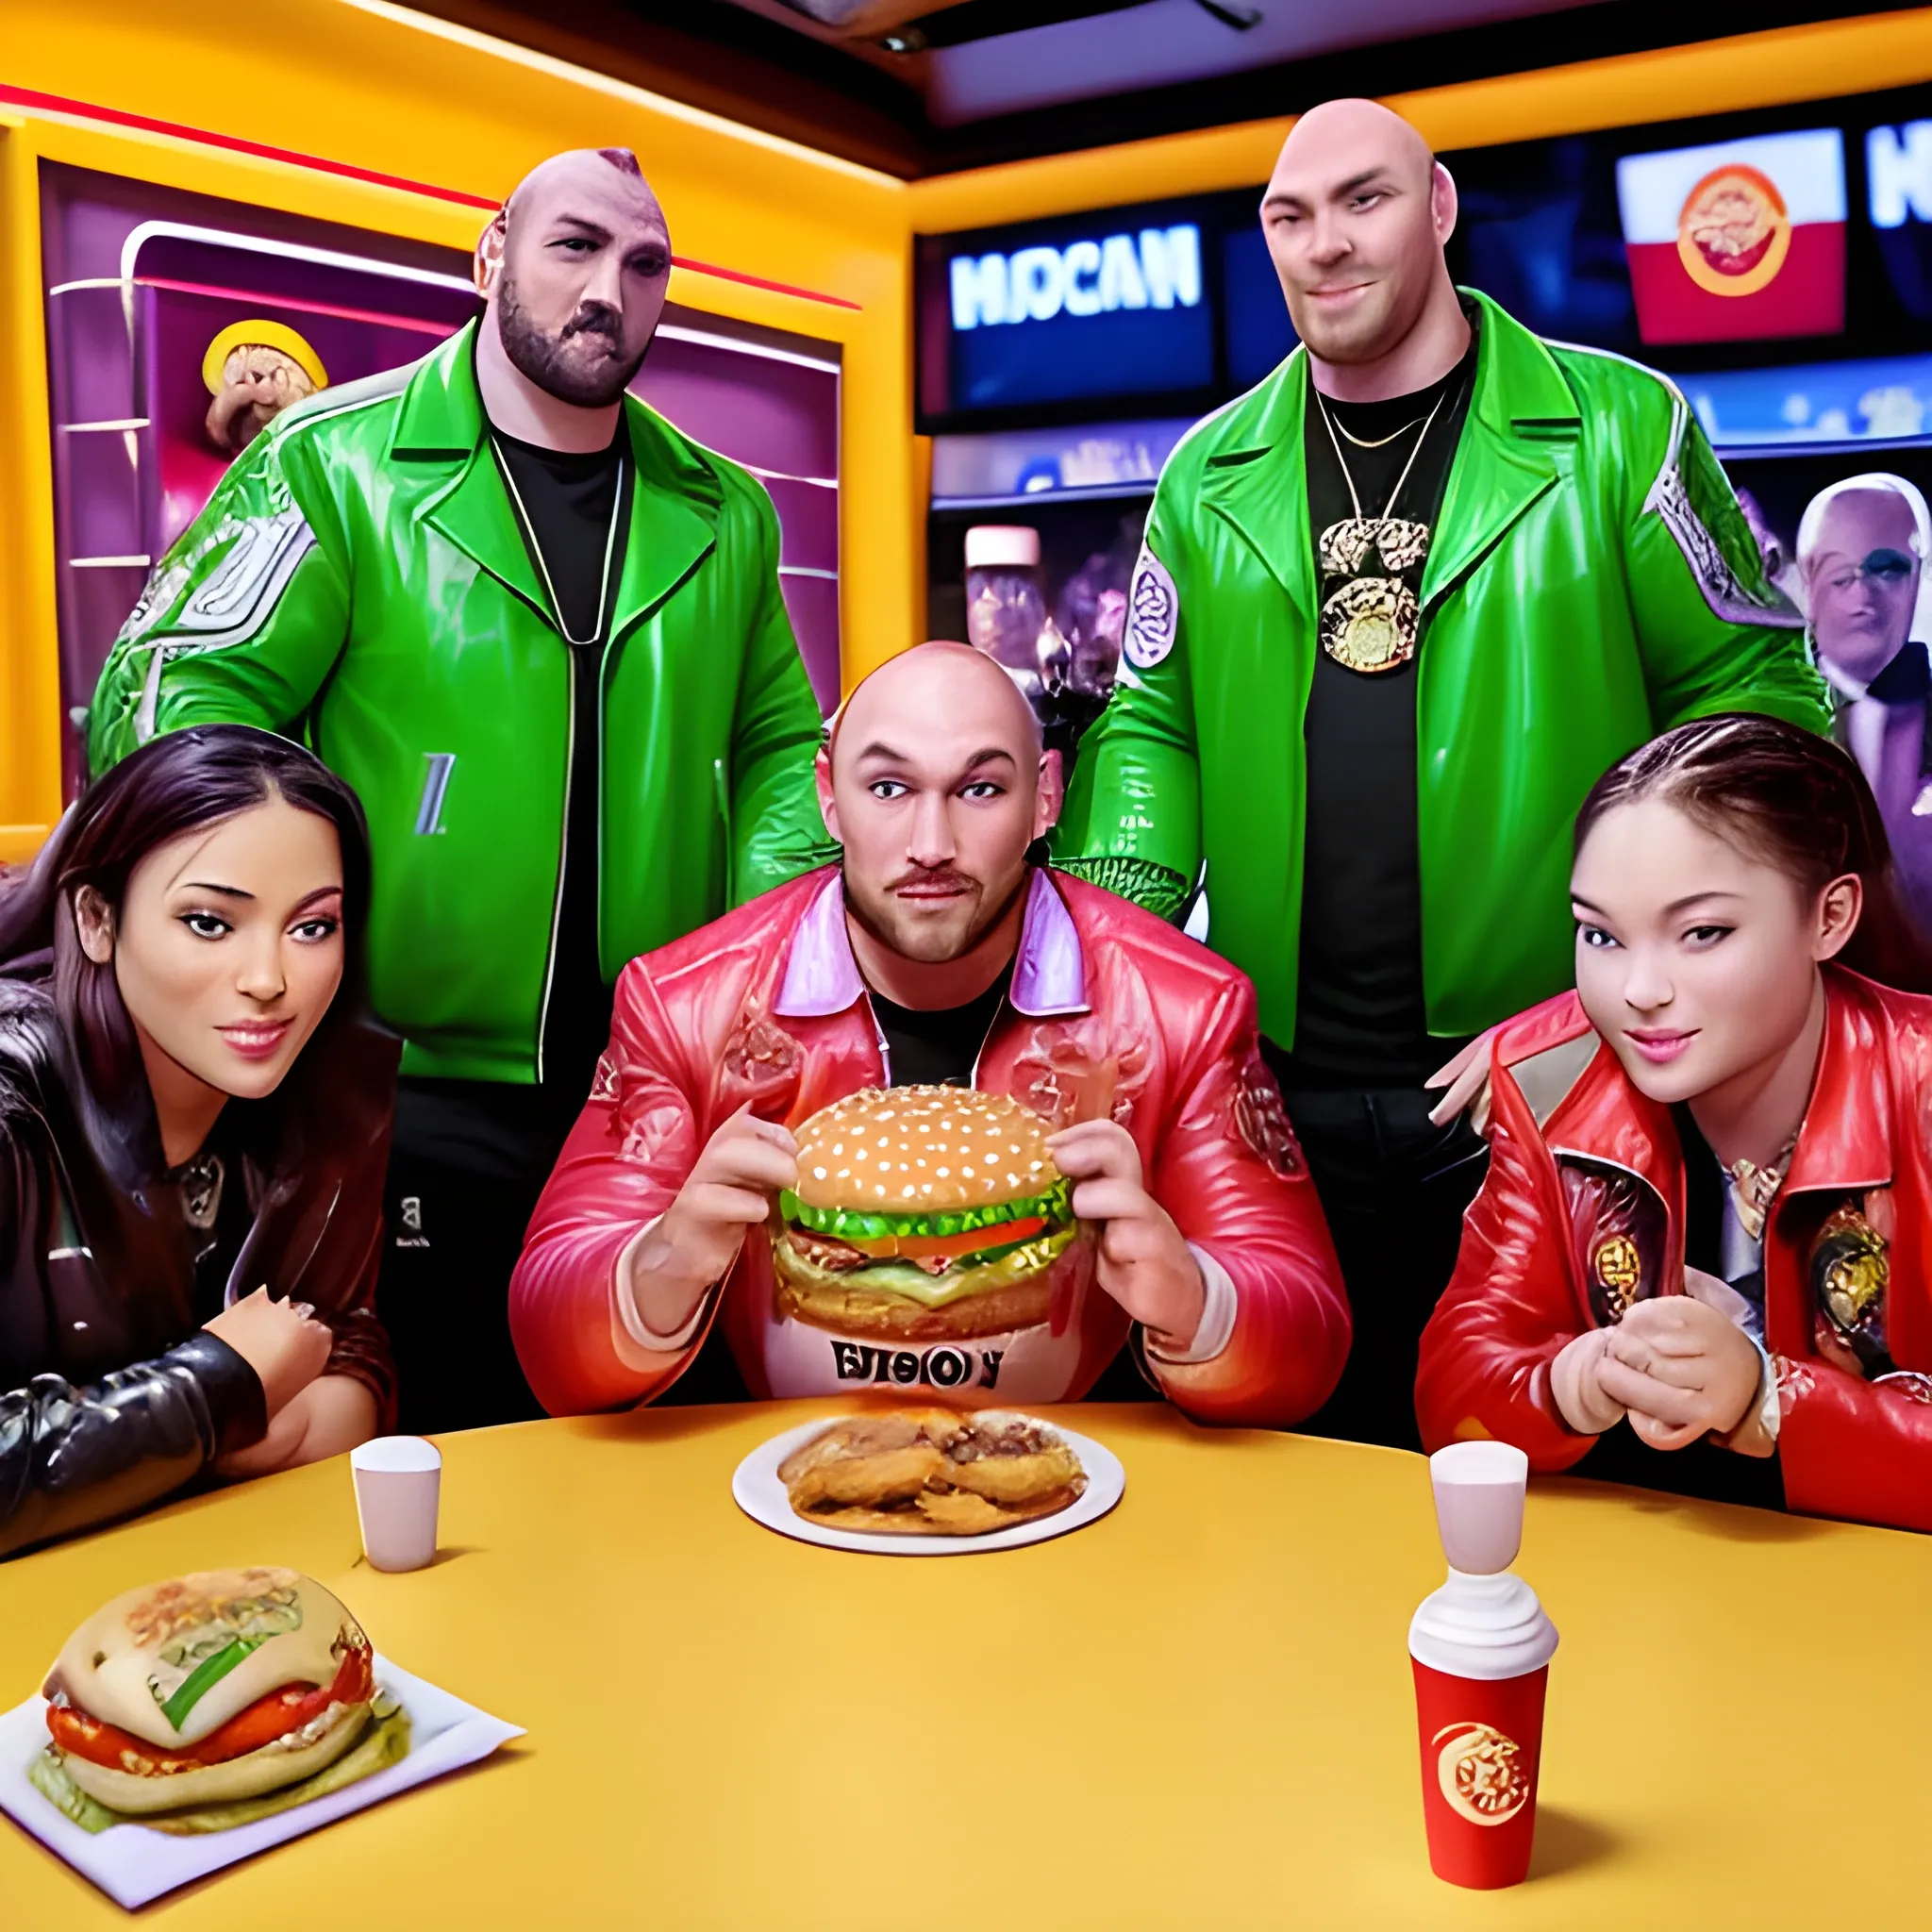 The photo shows 4 celebrities: elon musk, boxer tyson fury, rapper snoop dogg, shiba inu dog. They are wearing green leather jackets with crypto patterns. They are in a McDonald's and background flying soap bubbles, bubbles made of bitcoin and other cryptocurrencies. There are burgers and fries on the table. They look at the camera with clear eyes and smile.